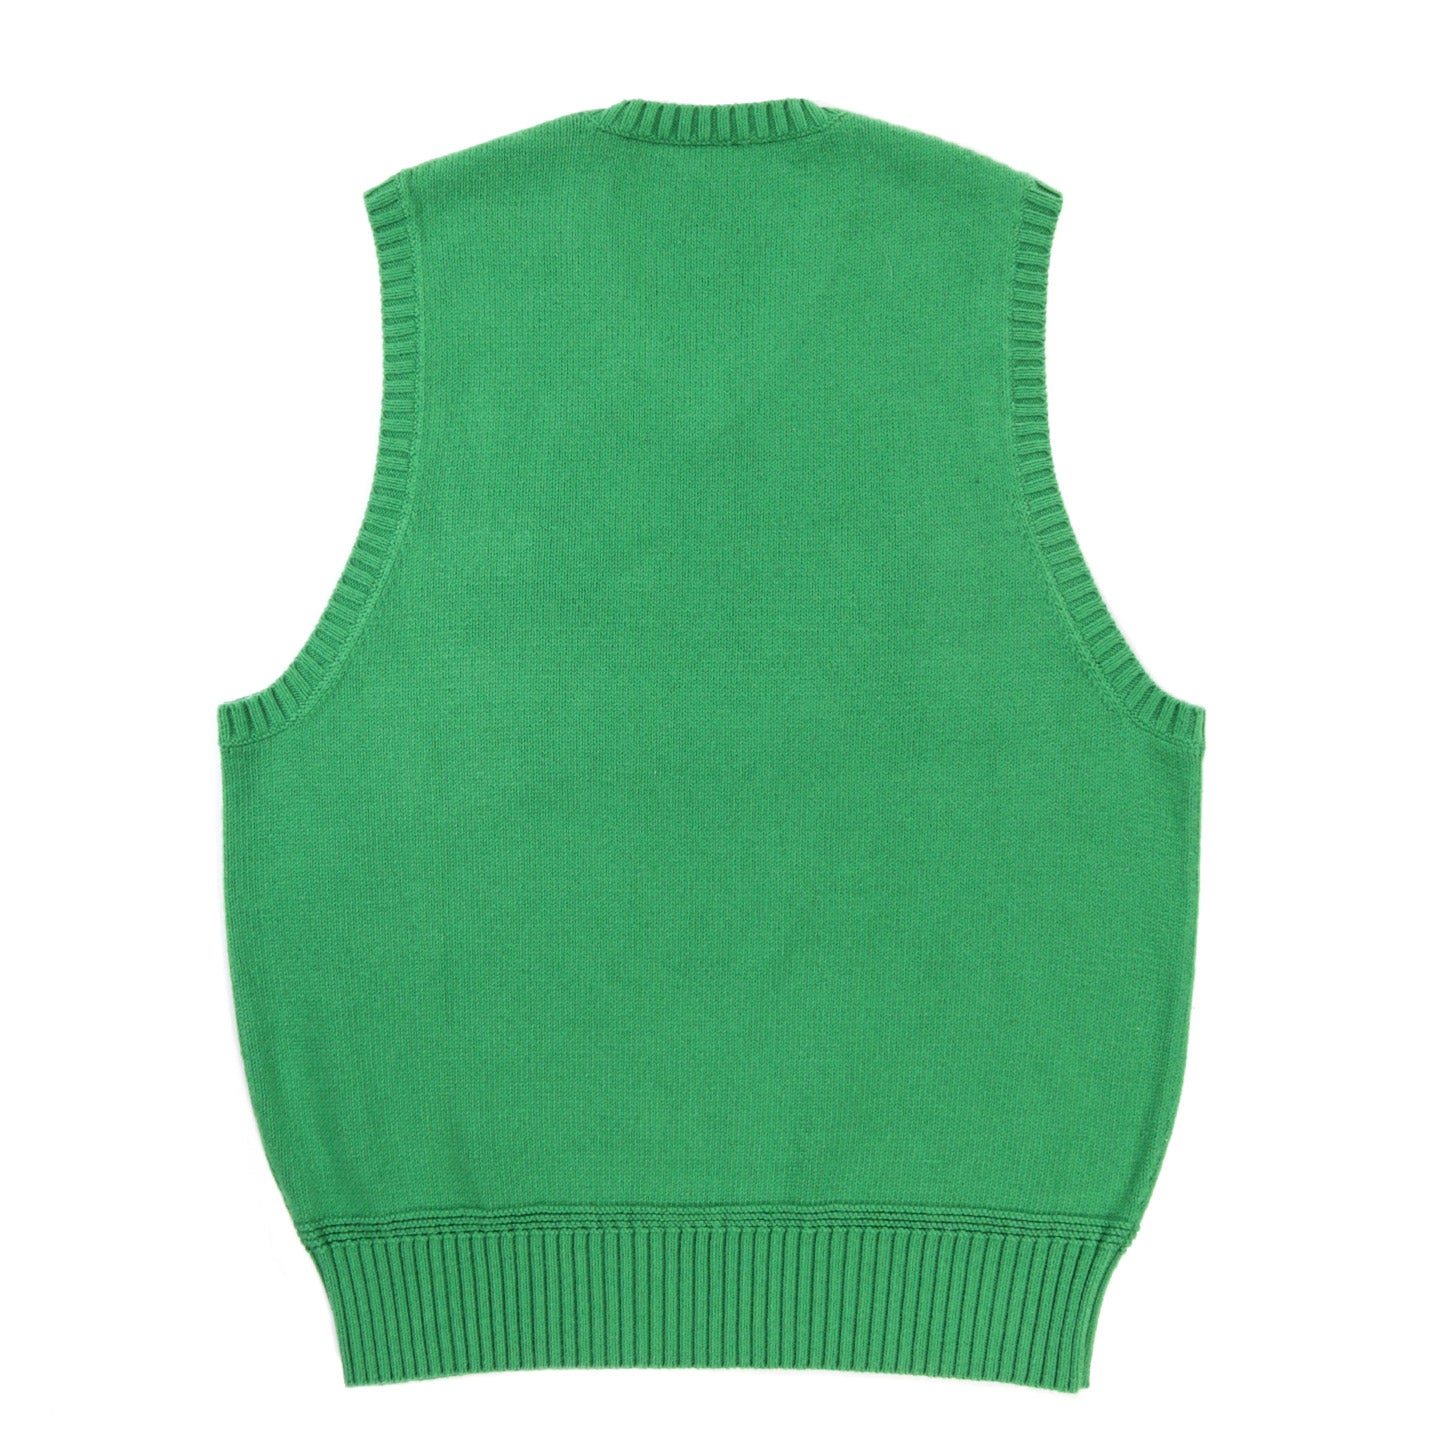 S.K. MANOR HILL SWEATER VEST KELLY GREEN COTTON